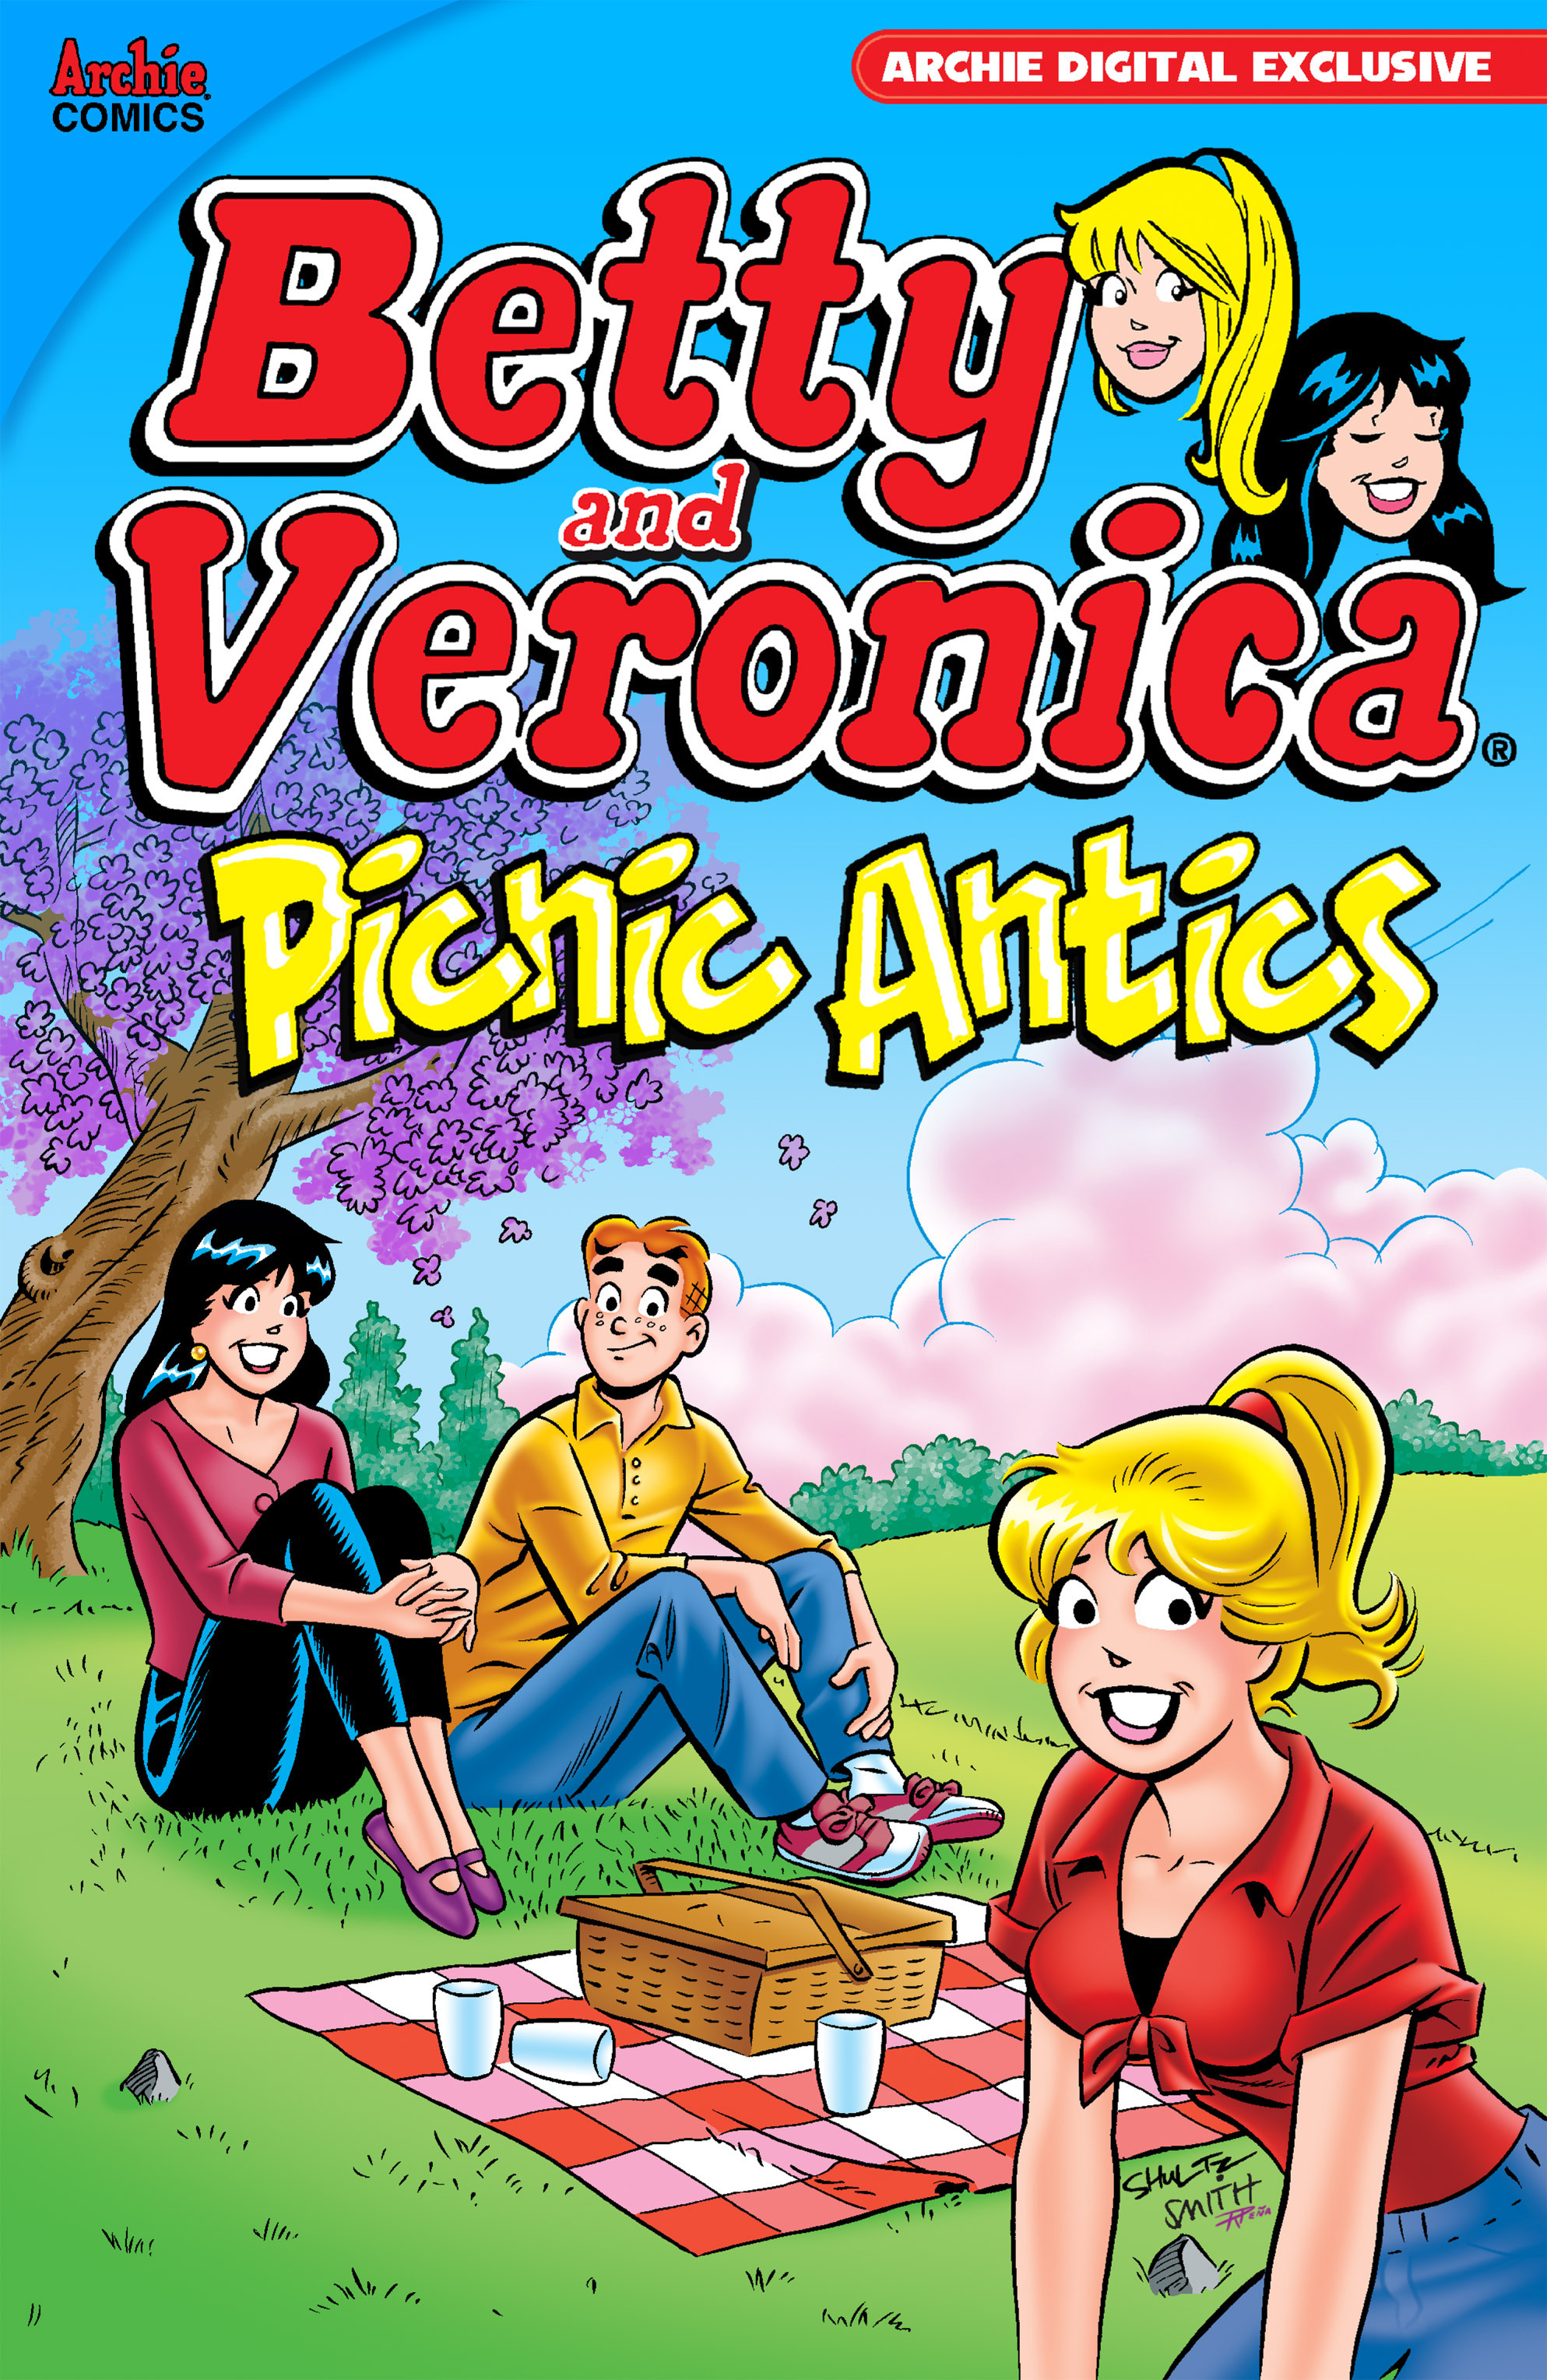 Read online Betty and Veronica: Picnic Antics comic -  Issue # TPB - 1